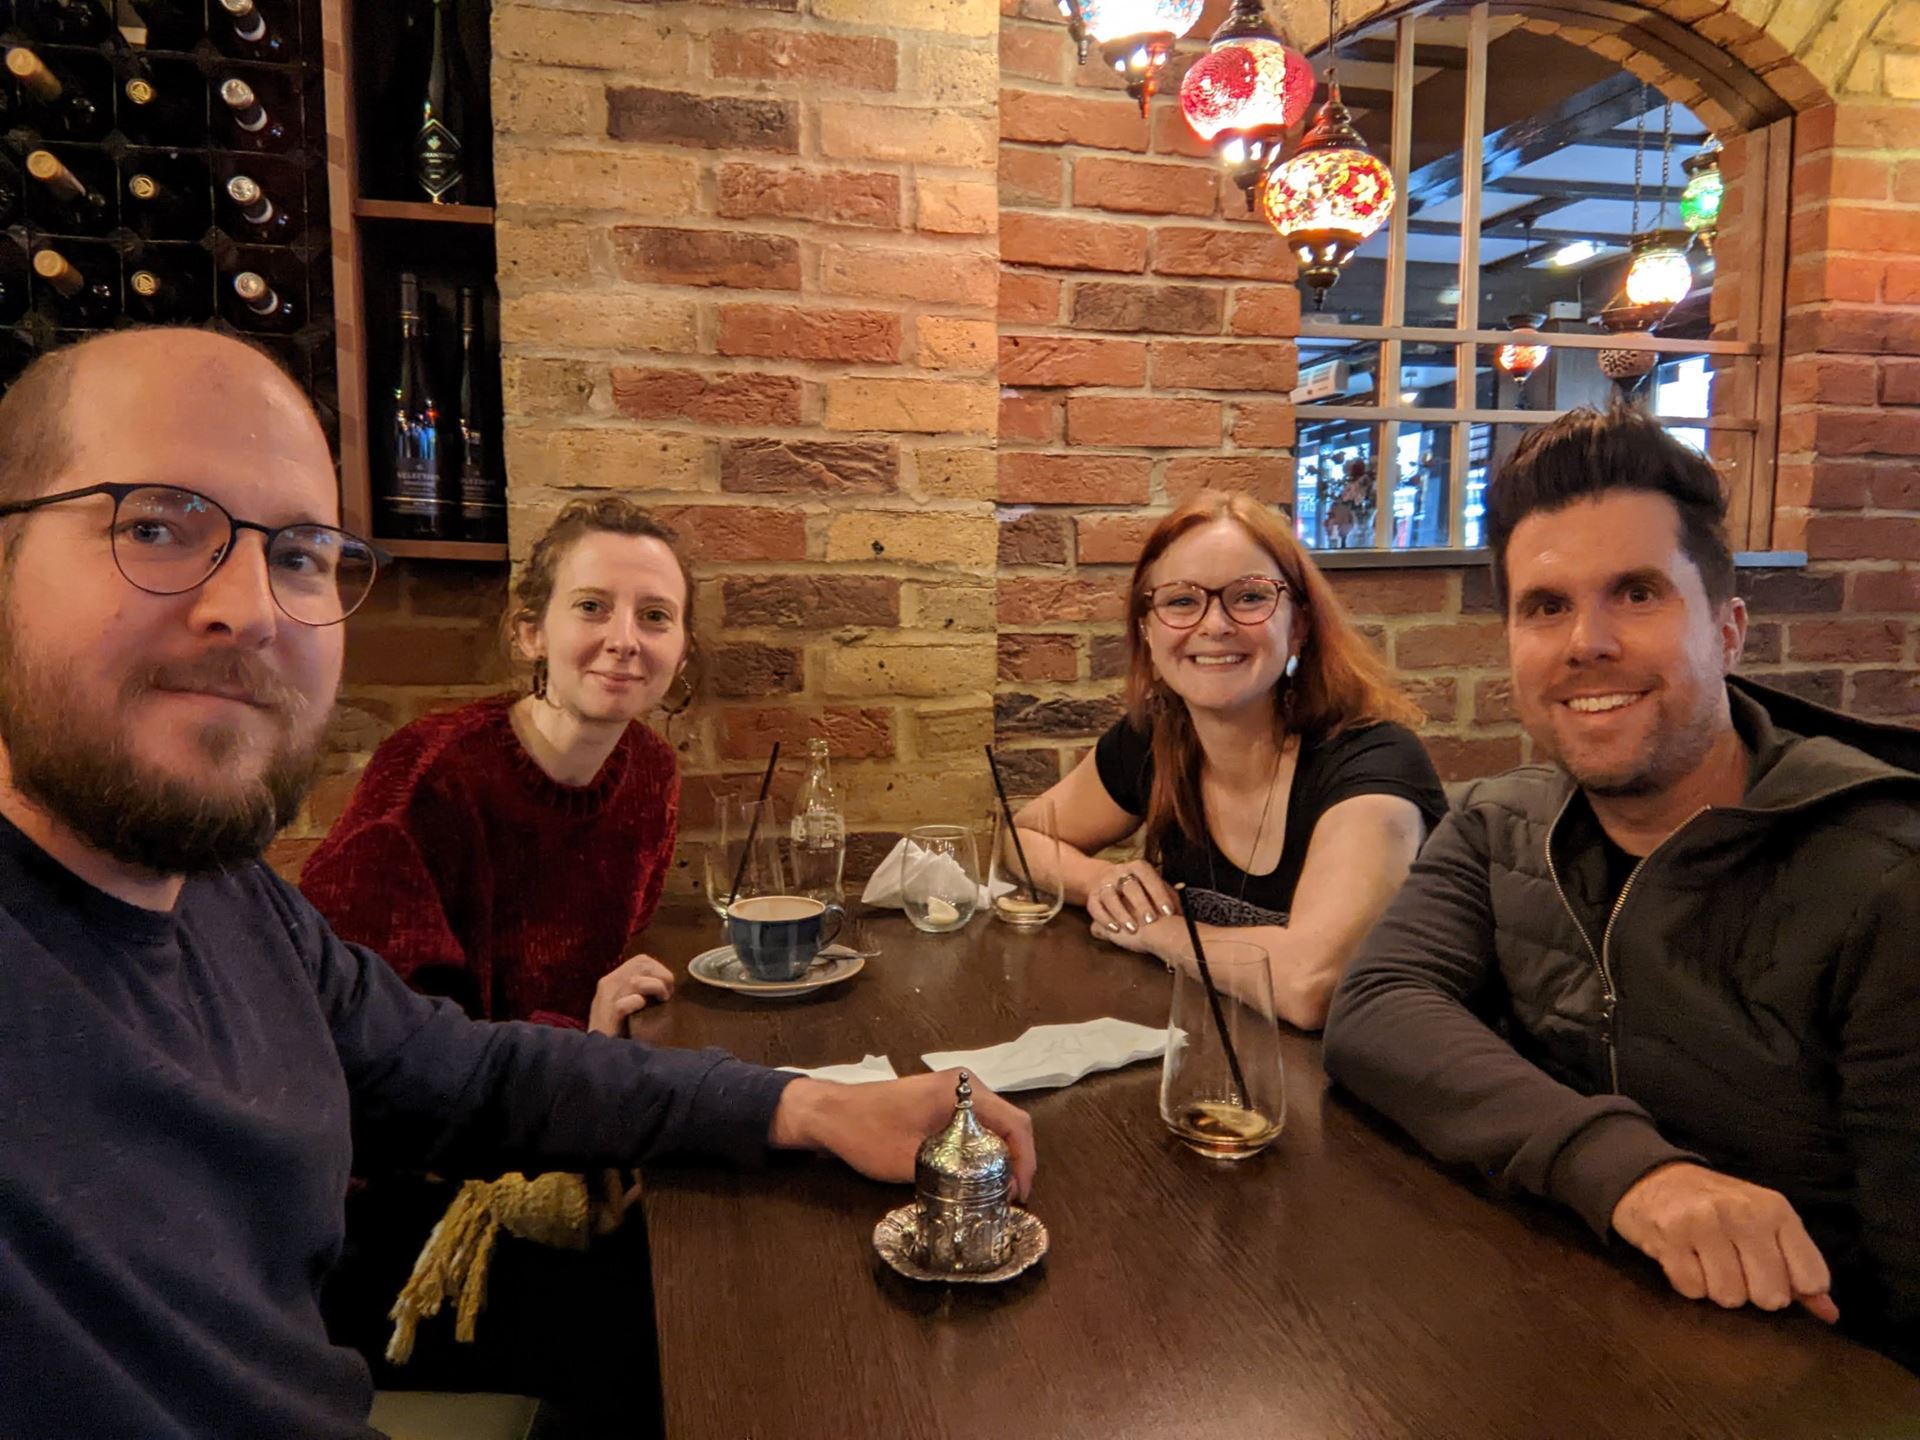 Pictured (left to right): Brian Tarran (Head of Data Science Platform, RSS), Mags Wiley (Head of Media and External Relations, RSS), Karen Lamb, Robert Mastrodomenico (Statistical Ambassador, RSS) London, November 2022